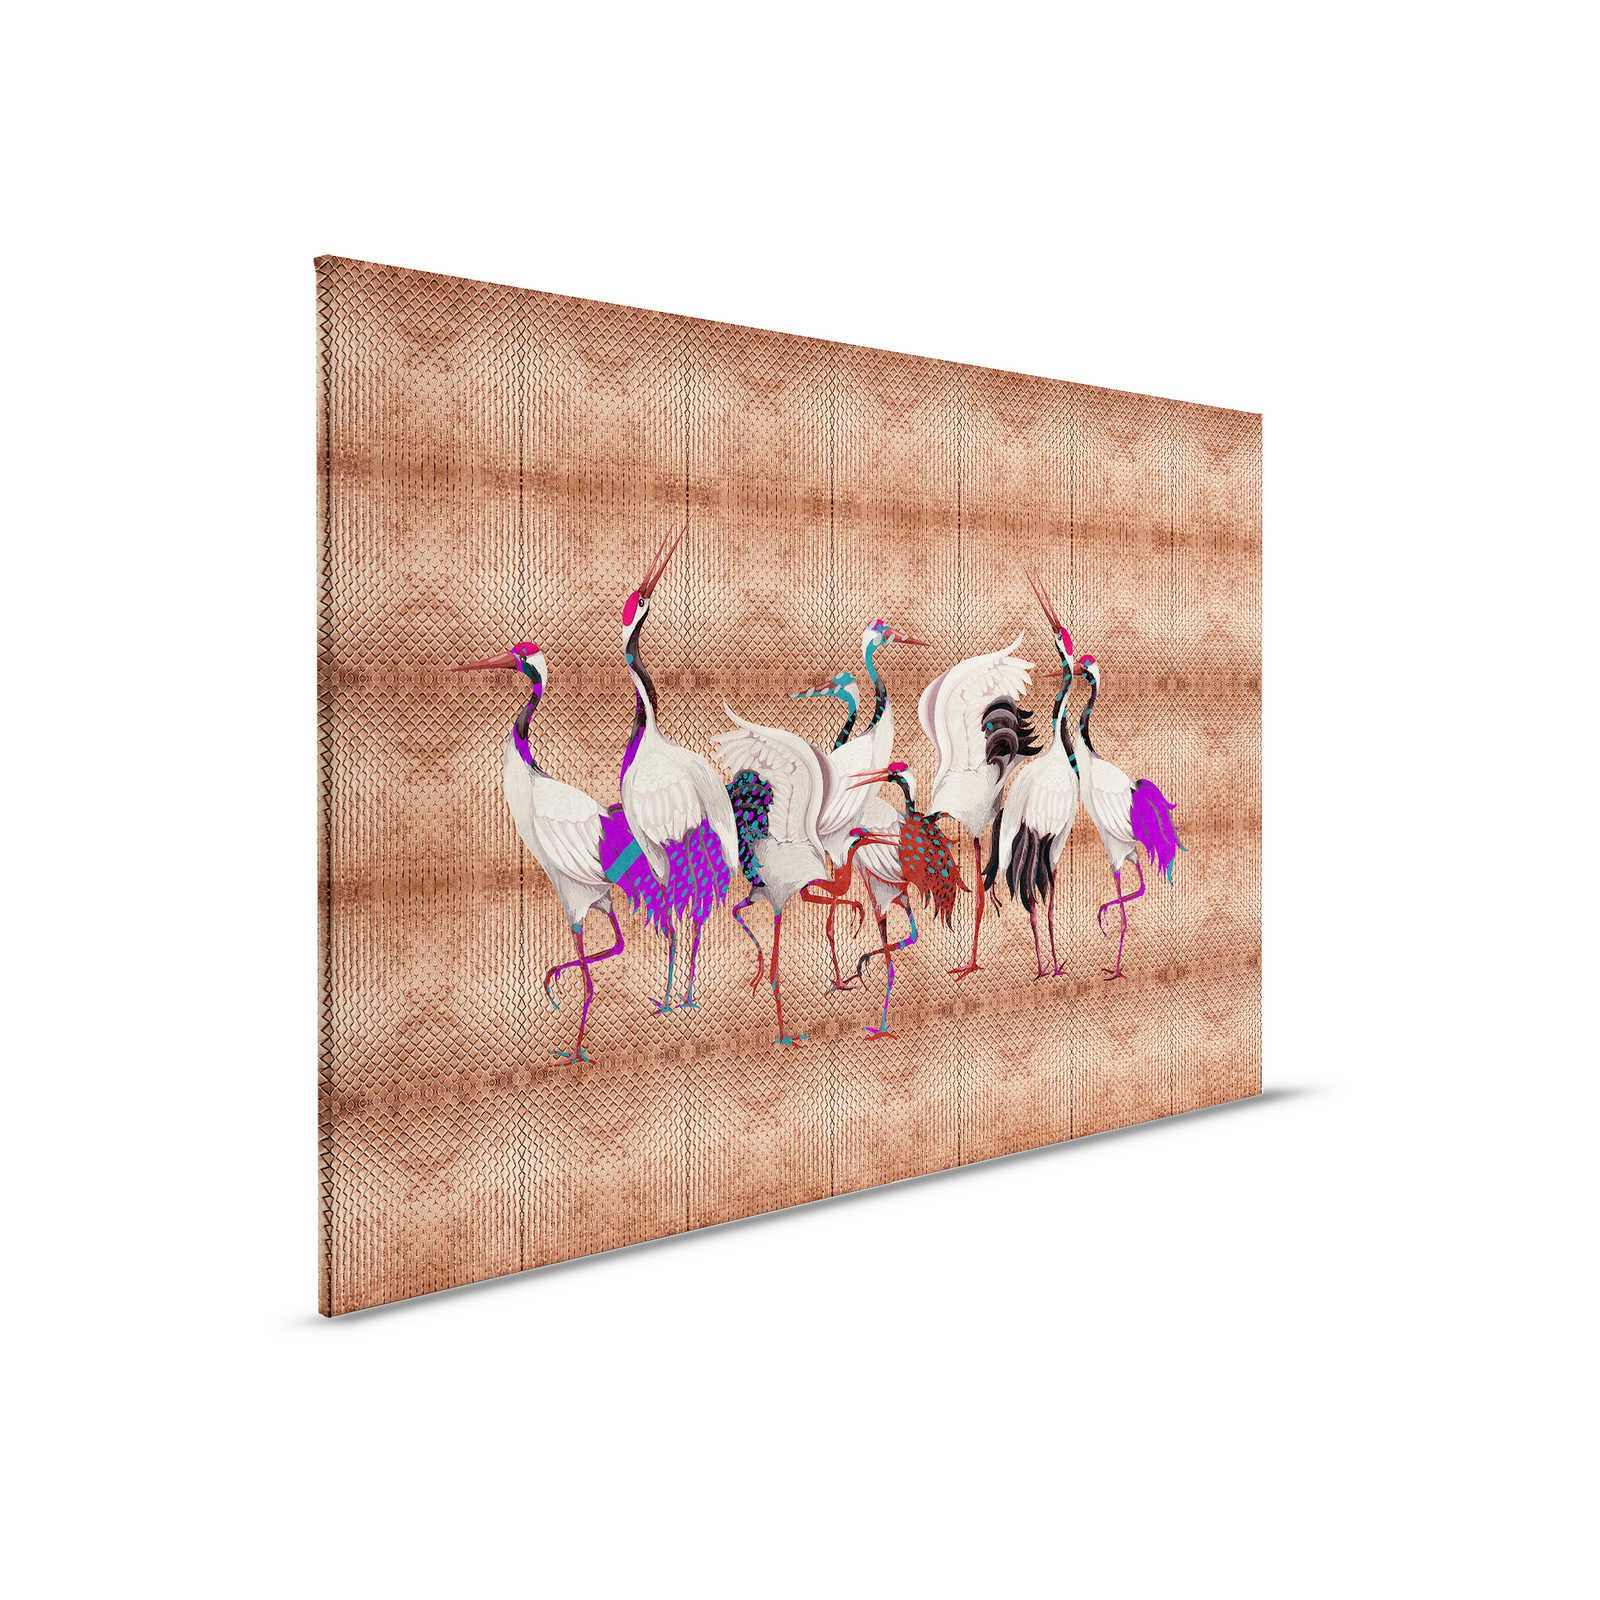         Land of Happiness 2 - Metallic canvas print copper with colourful crane motif - 0.90 m x 0.60 m
    